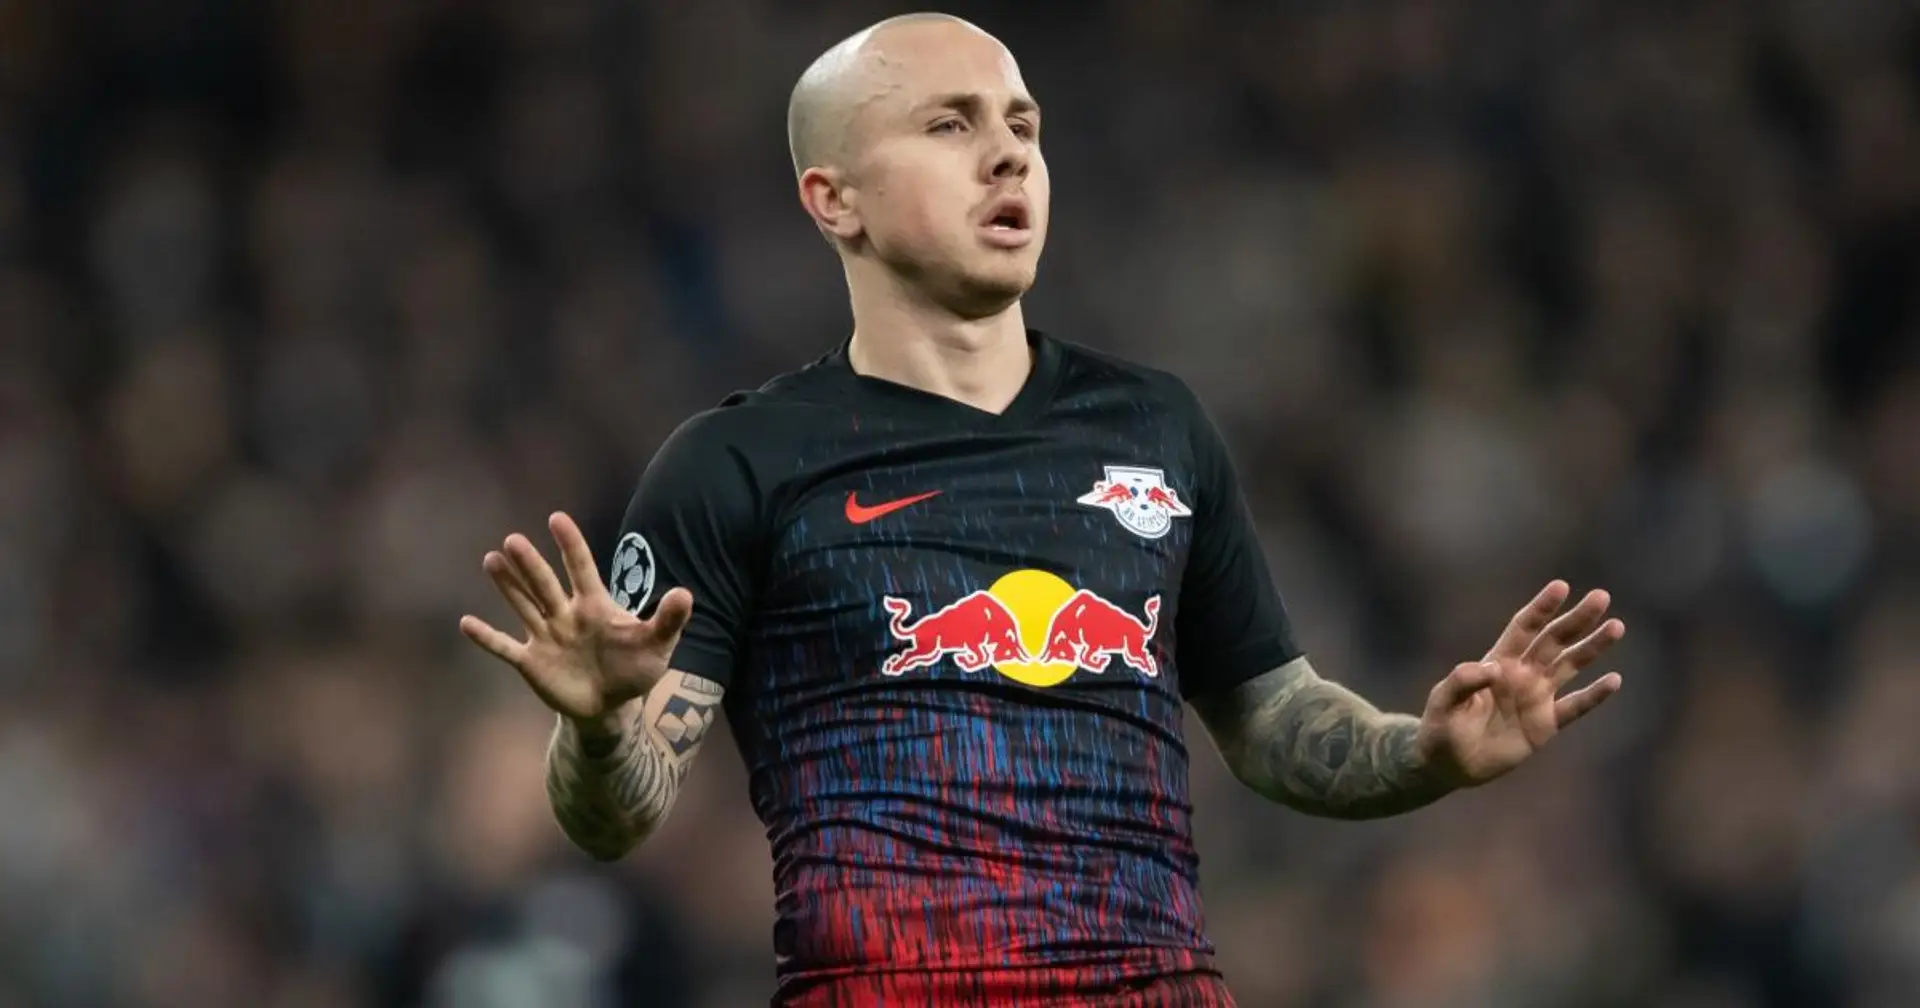 Barca miss out on Angelino but could still return for versatile left-back next year